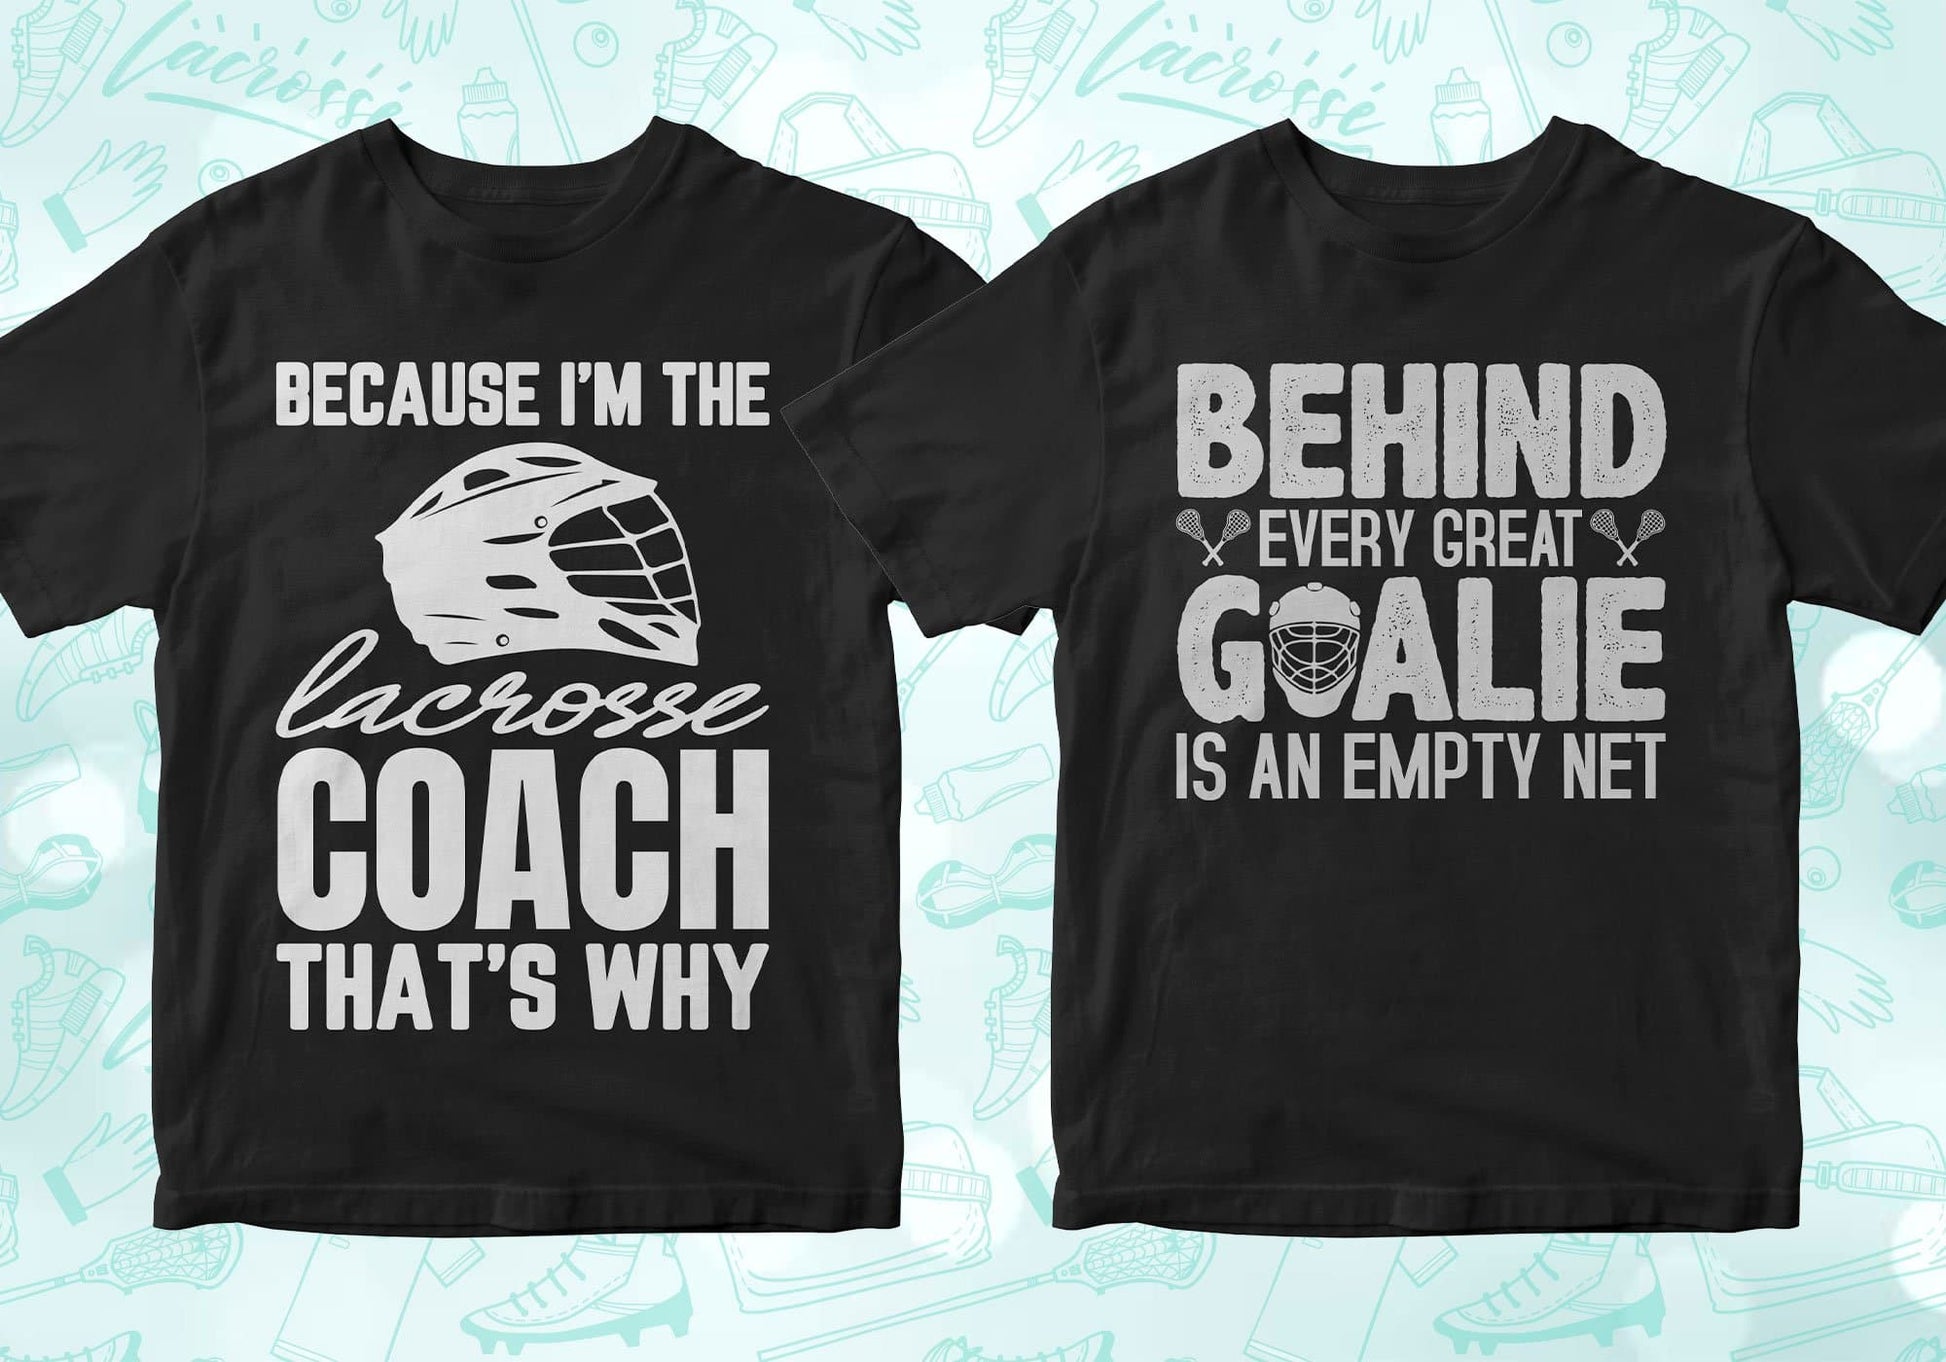 because i'm the lacrosse coach that's why, behind every great goalie is an empty net, lacrosse shirts lacrosse tshirt lacrosse t shirts lacrosse shirt designs lacrosse graphic